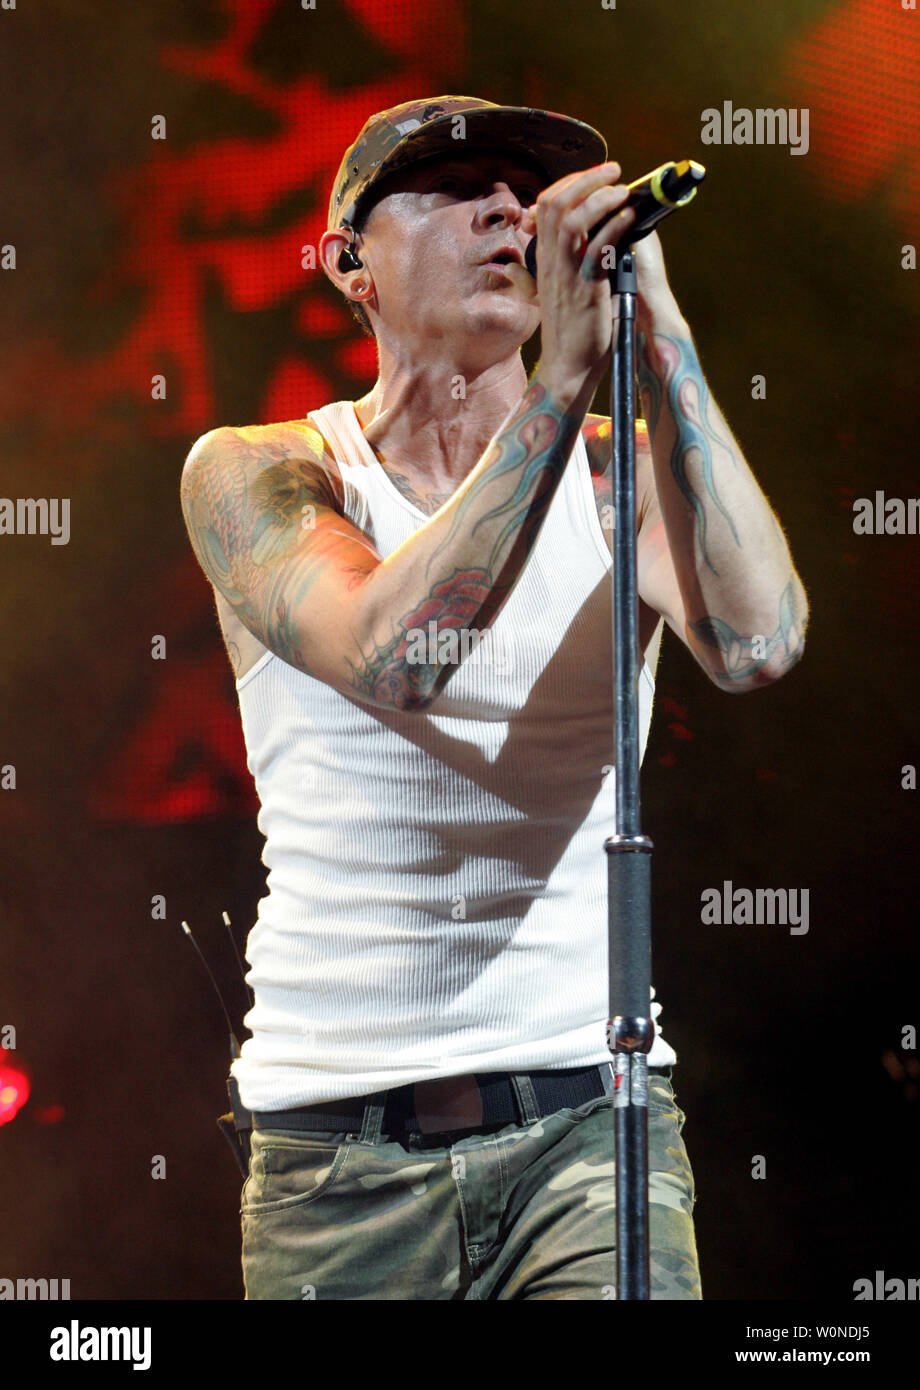 Chester Bennington with Linkin Park performs on the opening night of their tour at the Cruzan Amphitheatre in West Palm Beach, Florida on August 8, 2014. UPI/Michael Bush Stock Photo